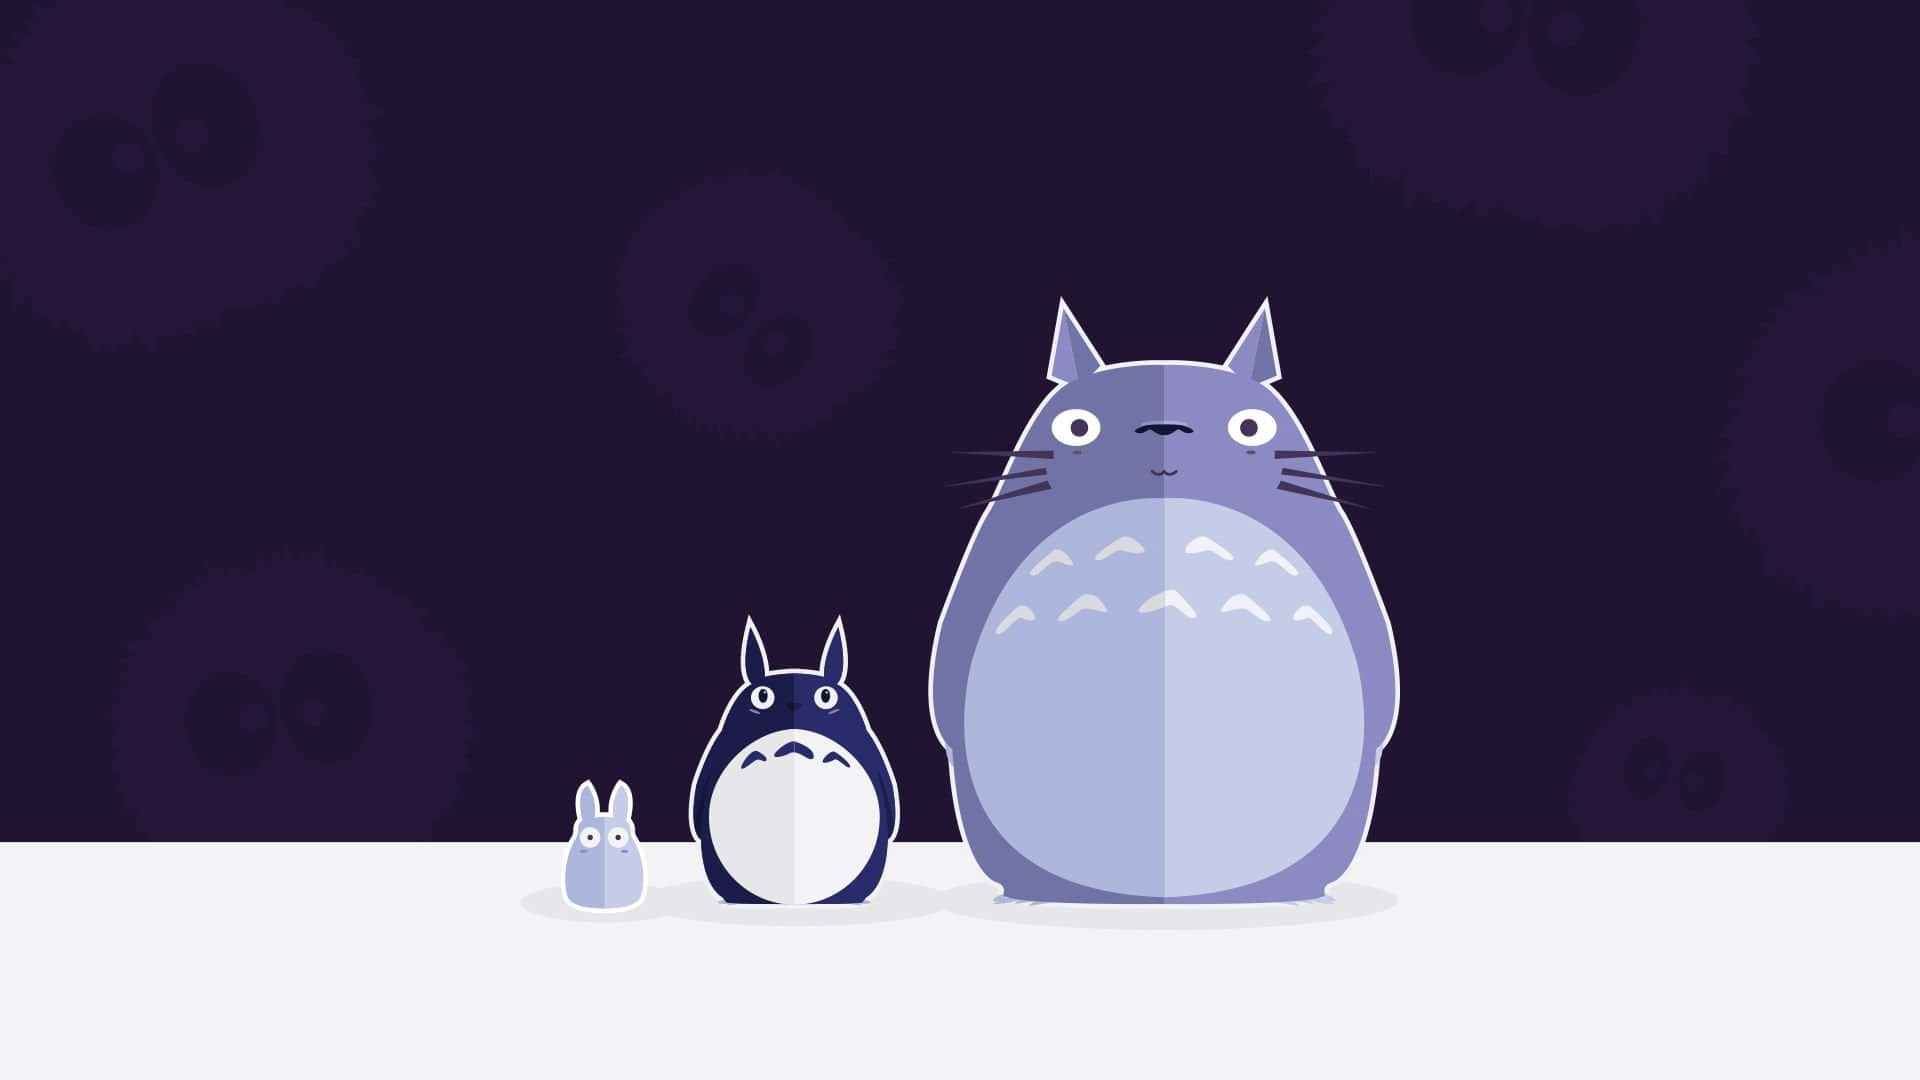 a totoro and a rabbit standing next to each other Wallpaper